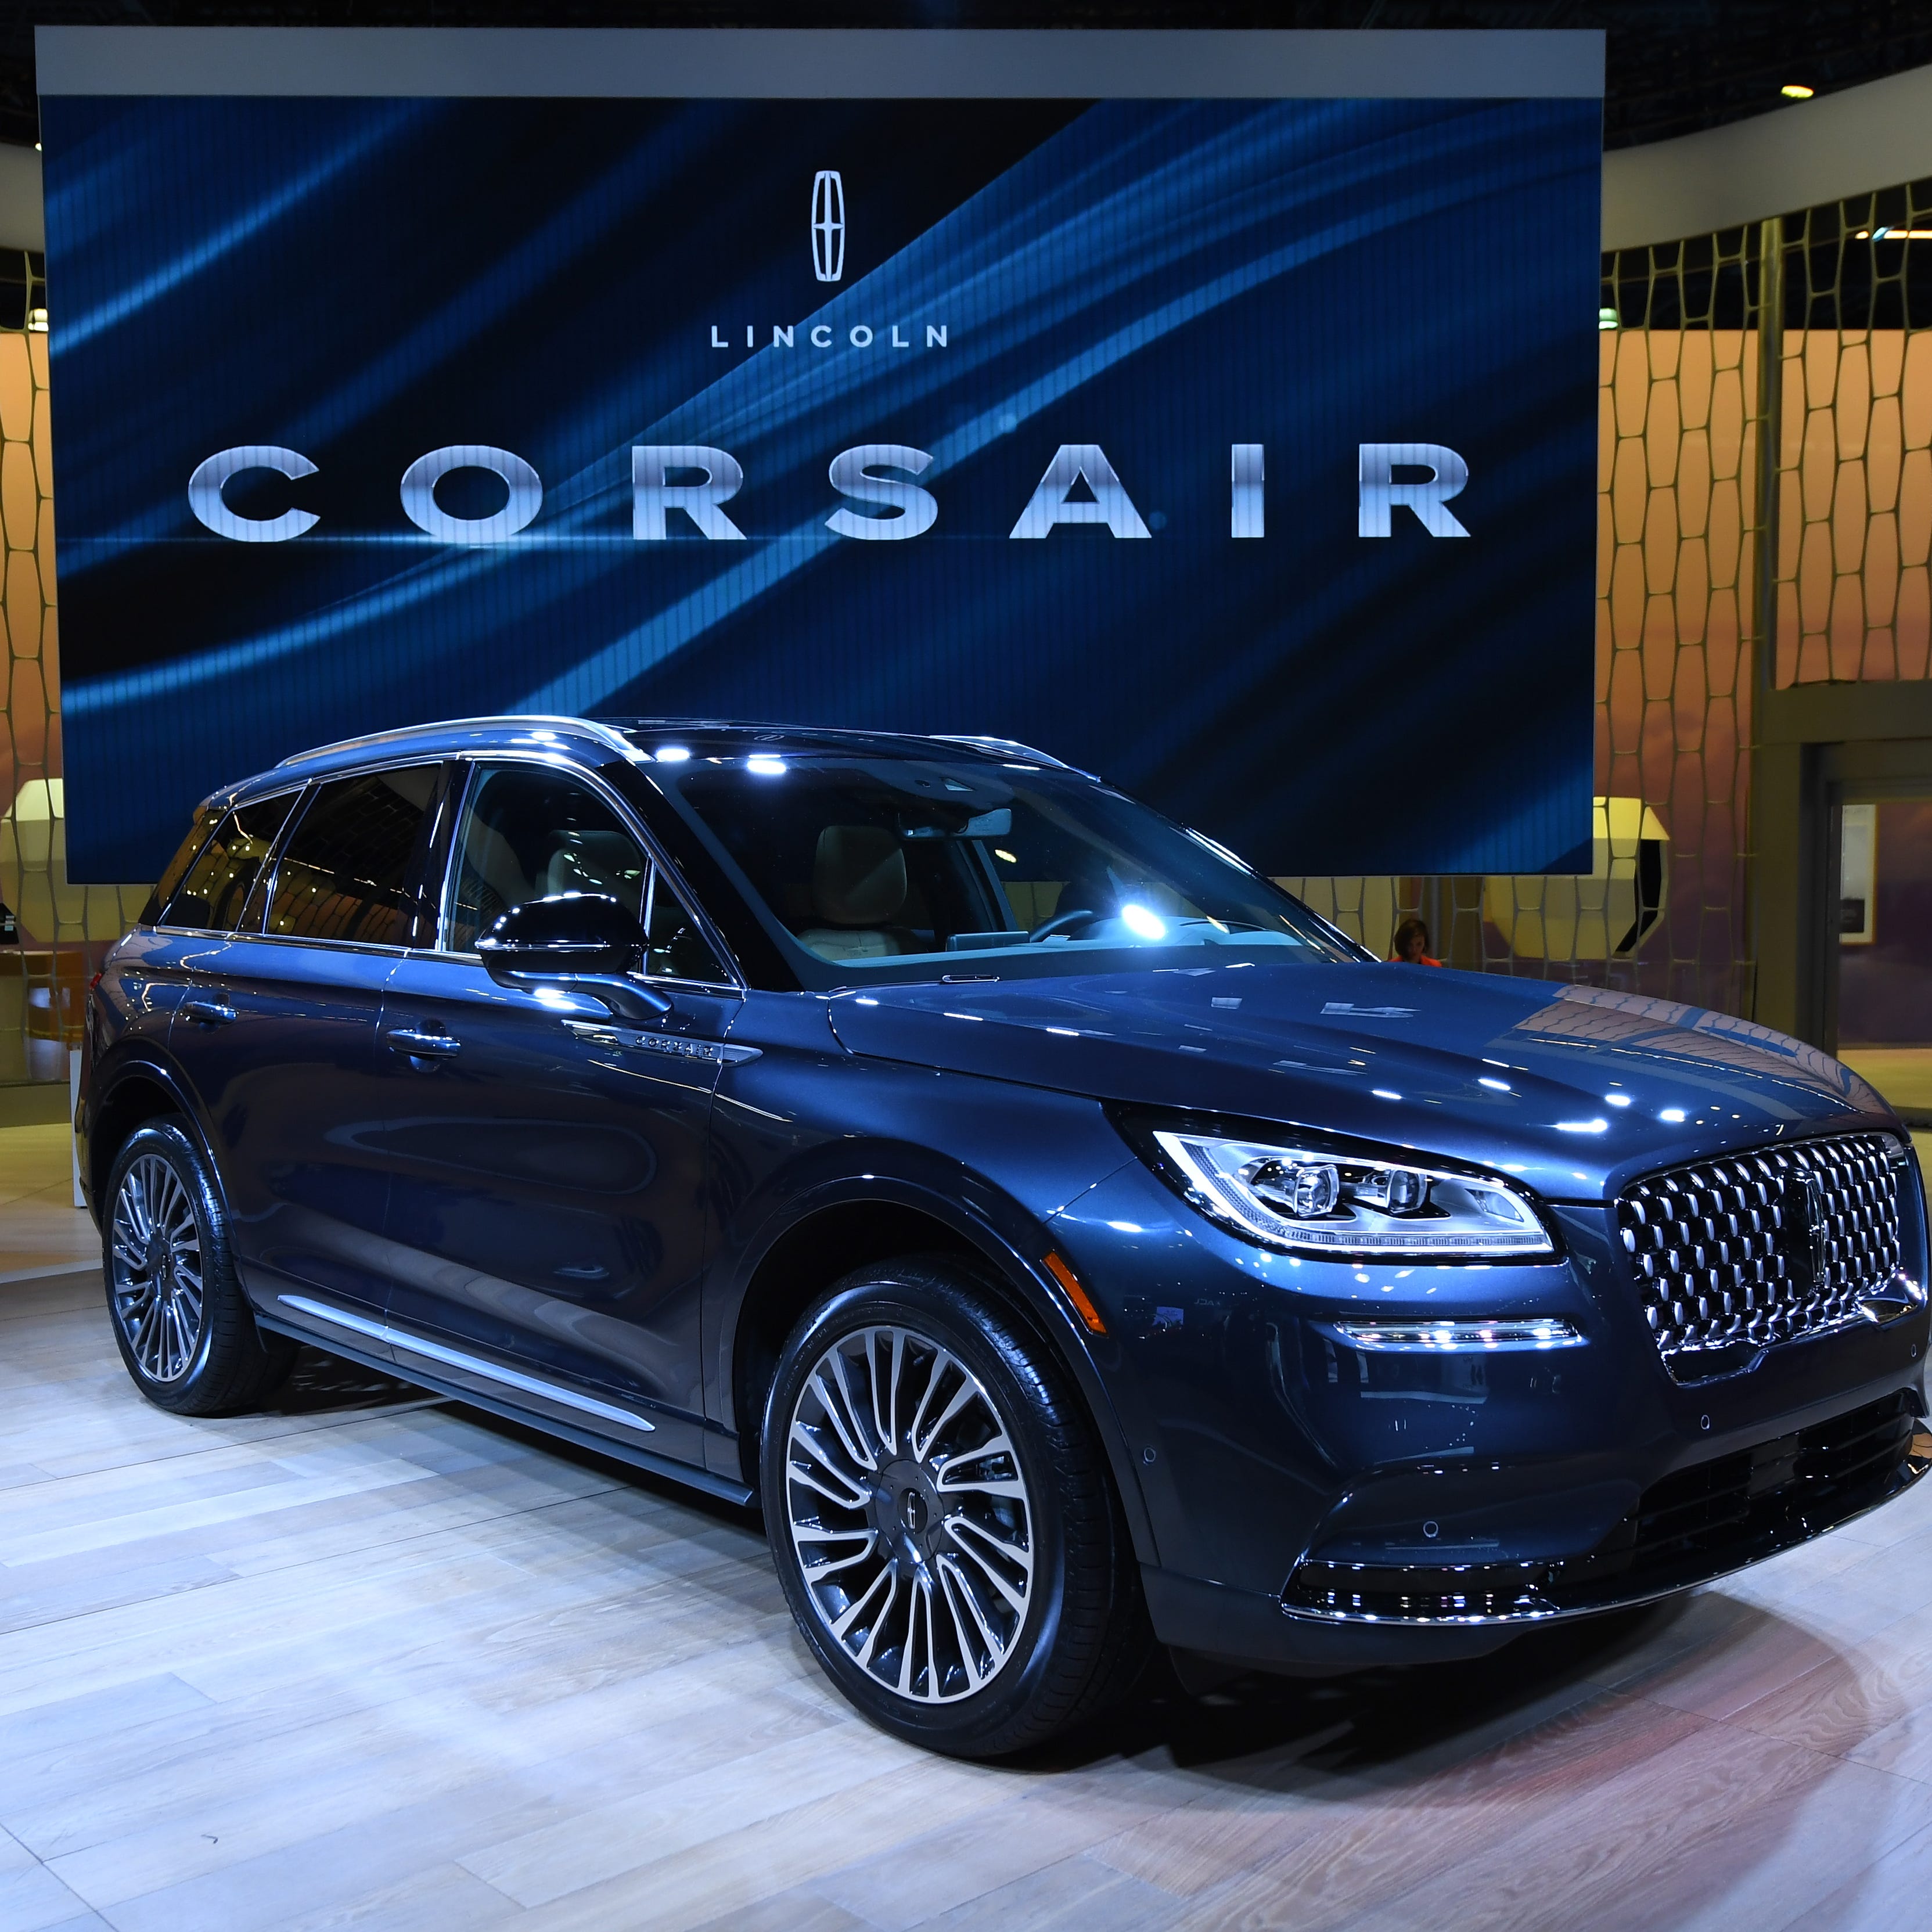 The 2020 Lincoln Corsair at the New York Auto Show on April 16, 2019.